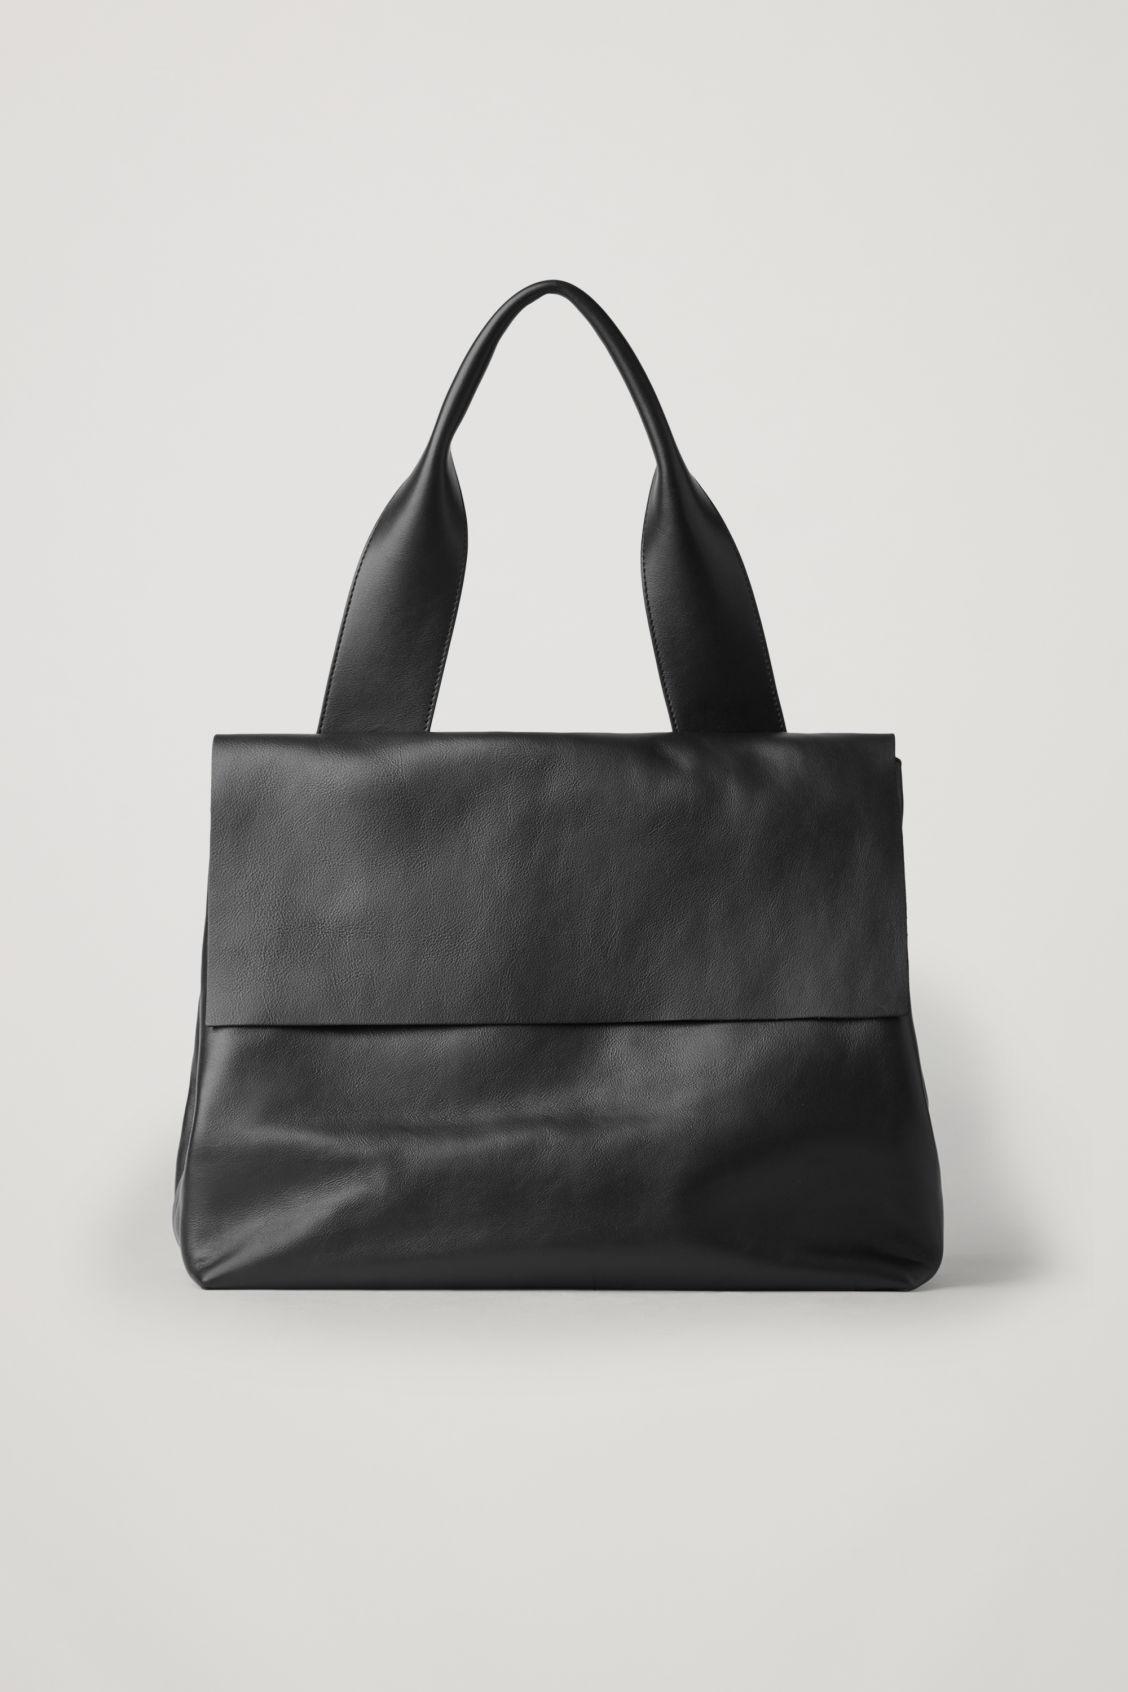 COS Leather Tote Bag With Strap in Black | Lyst